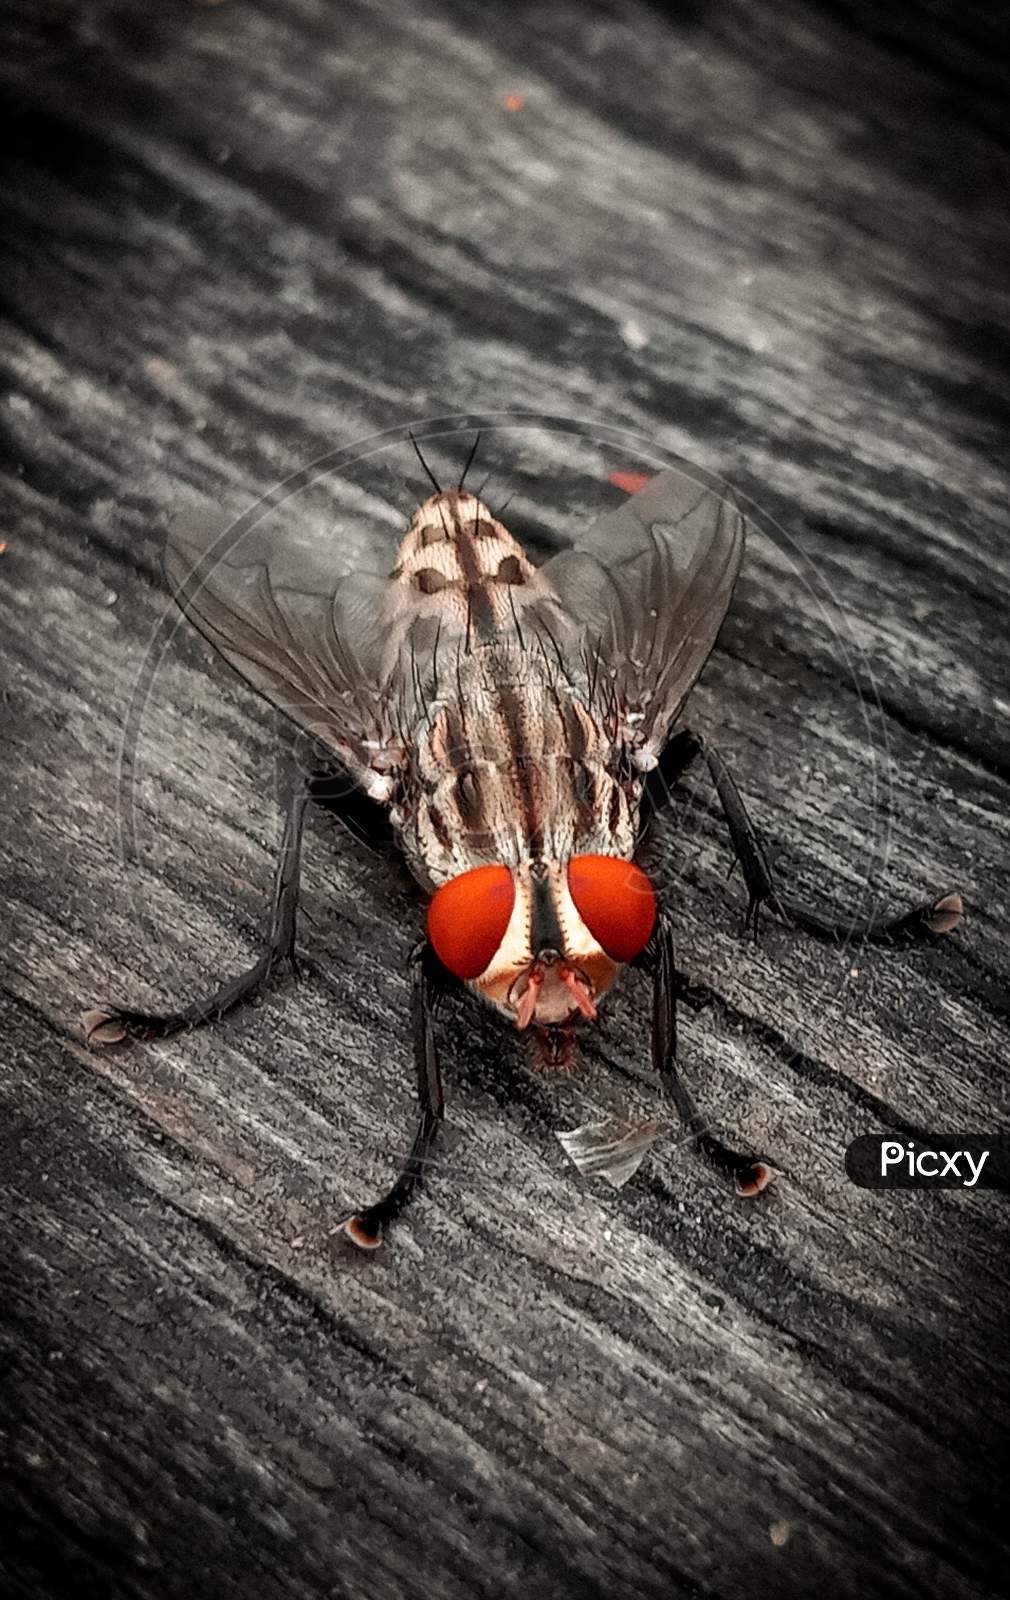 The Closed pic of housefly